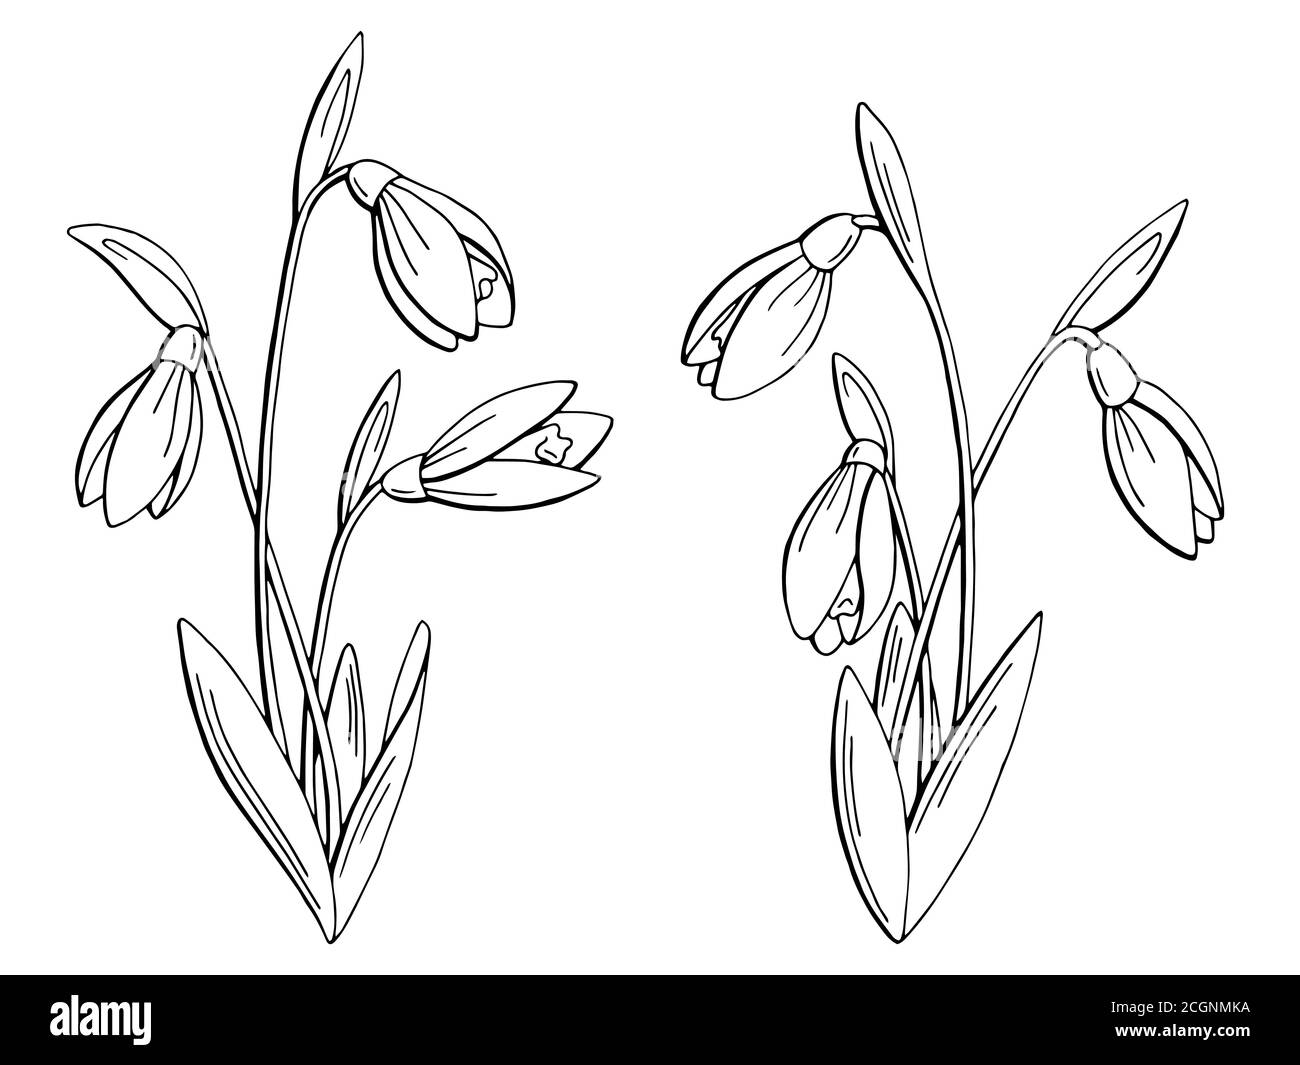 Snowdrop sketch Black and White Stock Photos  Images  Alamy